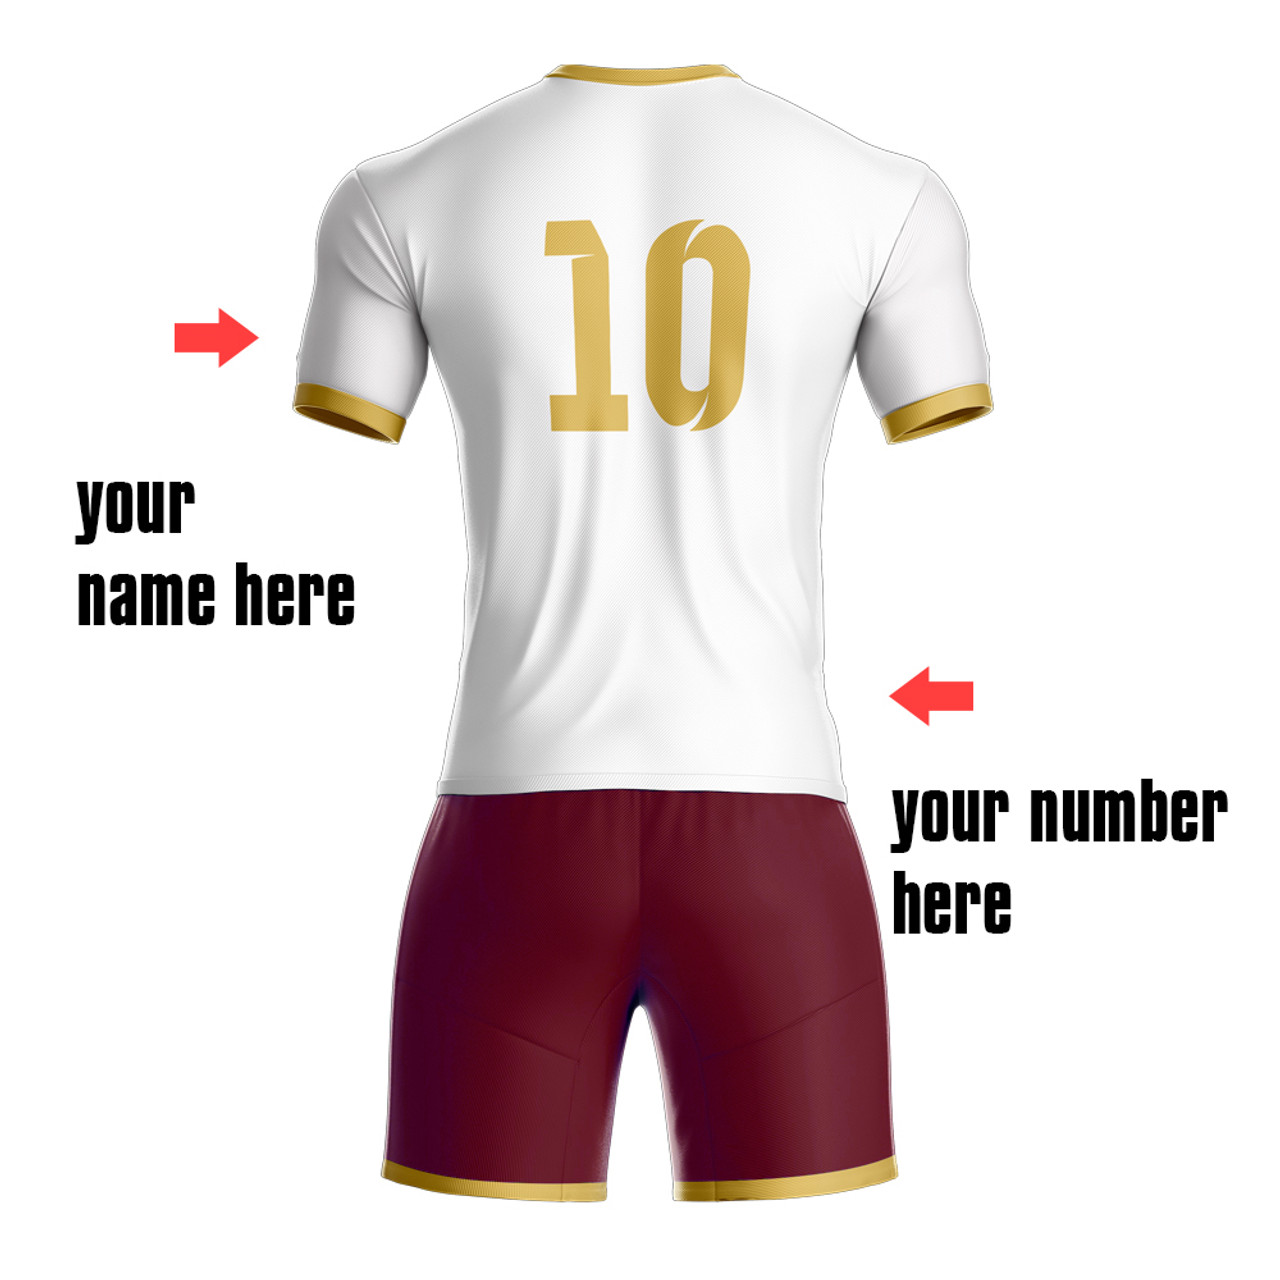 1,000 SUBSCRIBERS SOCCER JERSEY / FOOTBALL SHIRT GIVEAWAY!! 